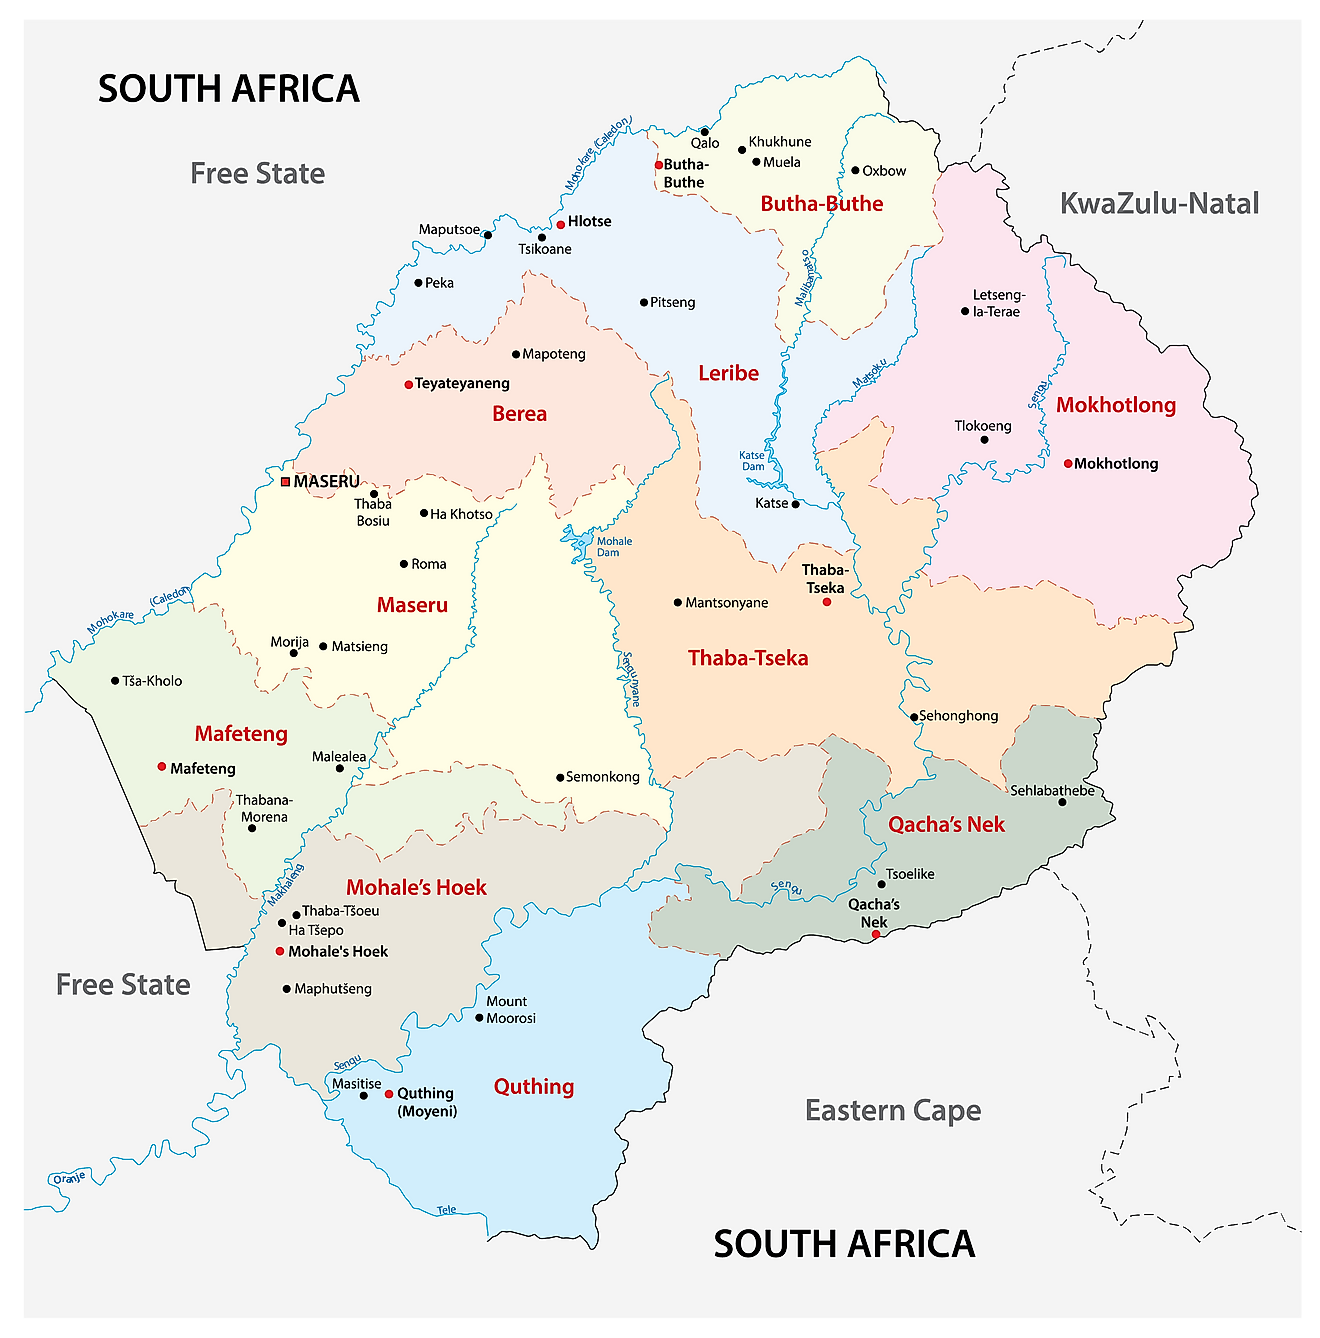 The Political Map of Lesotho displaying the 10 districts, their capitals including the national capital of Maseru.